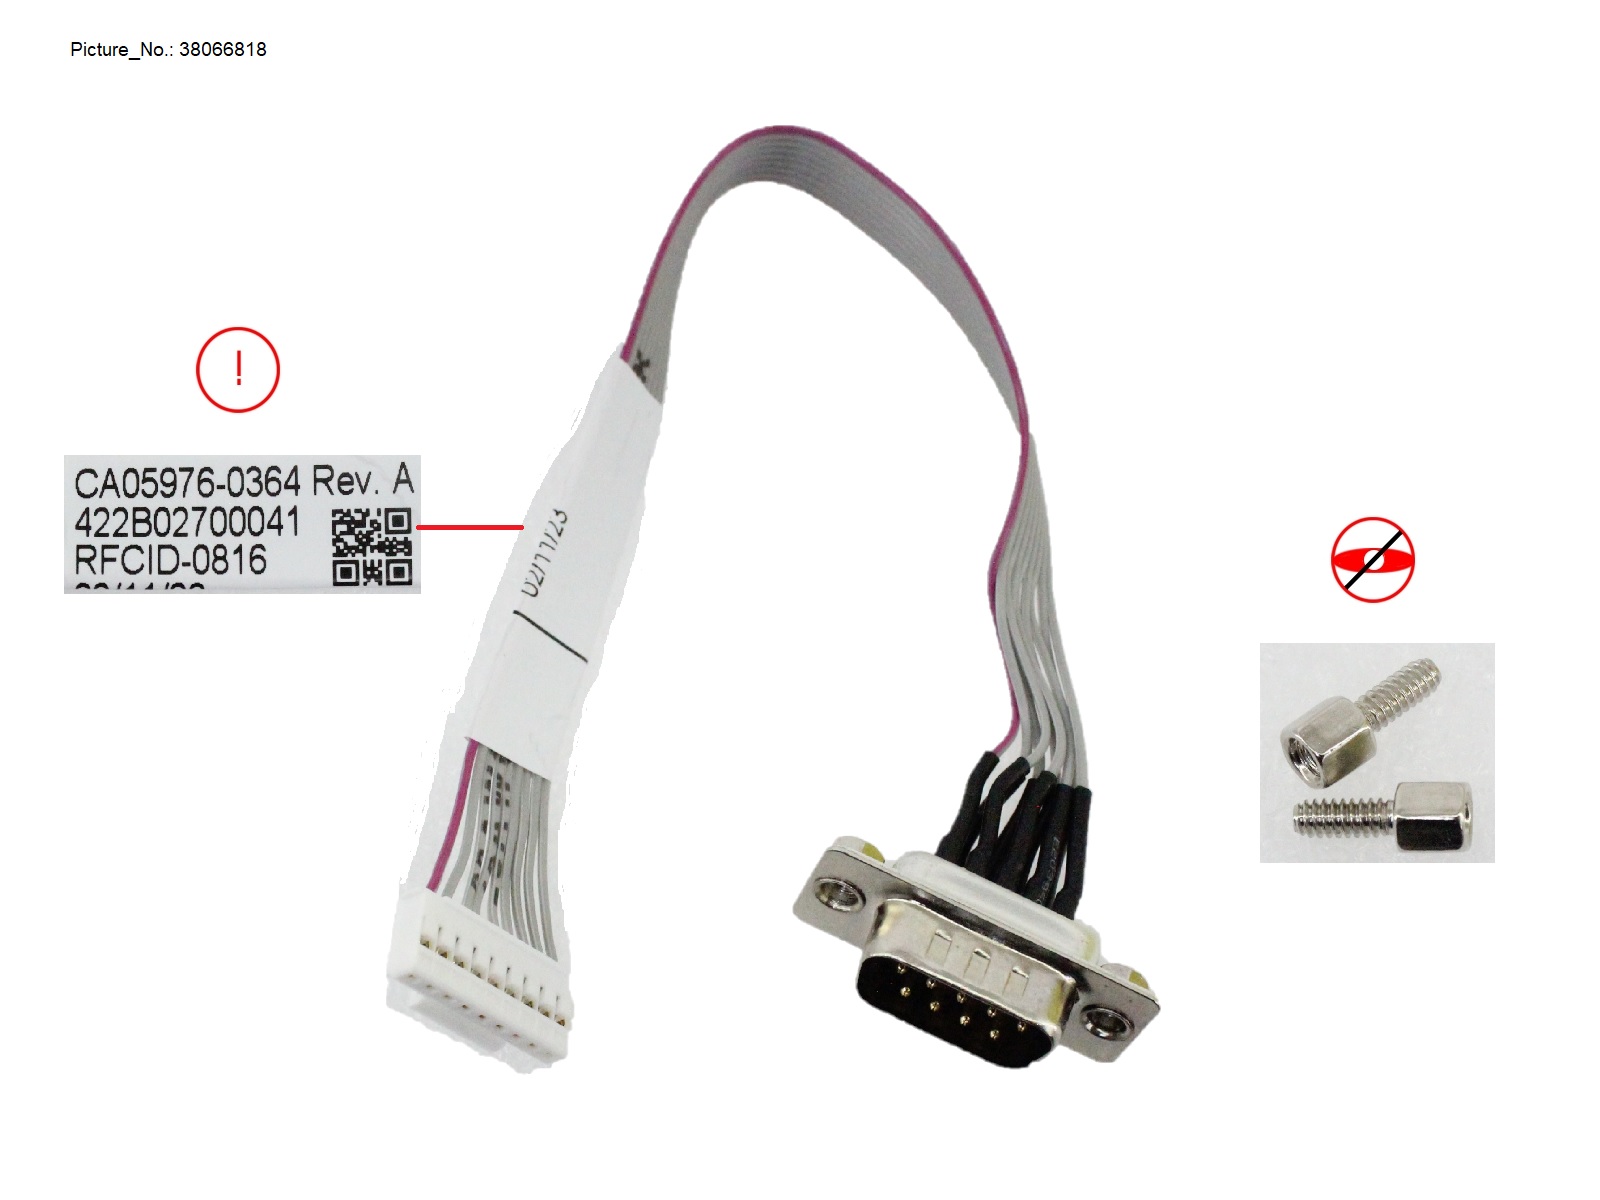 SERIAL PORT CABLE W/SCREW